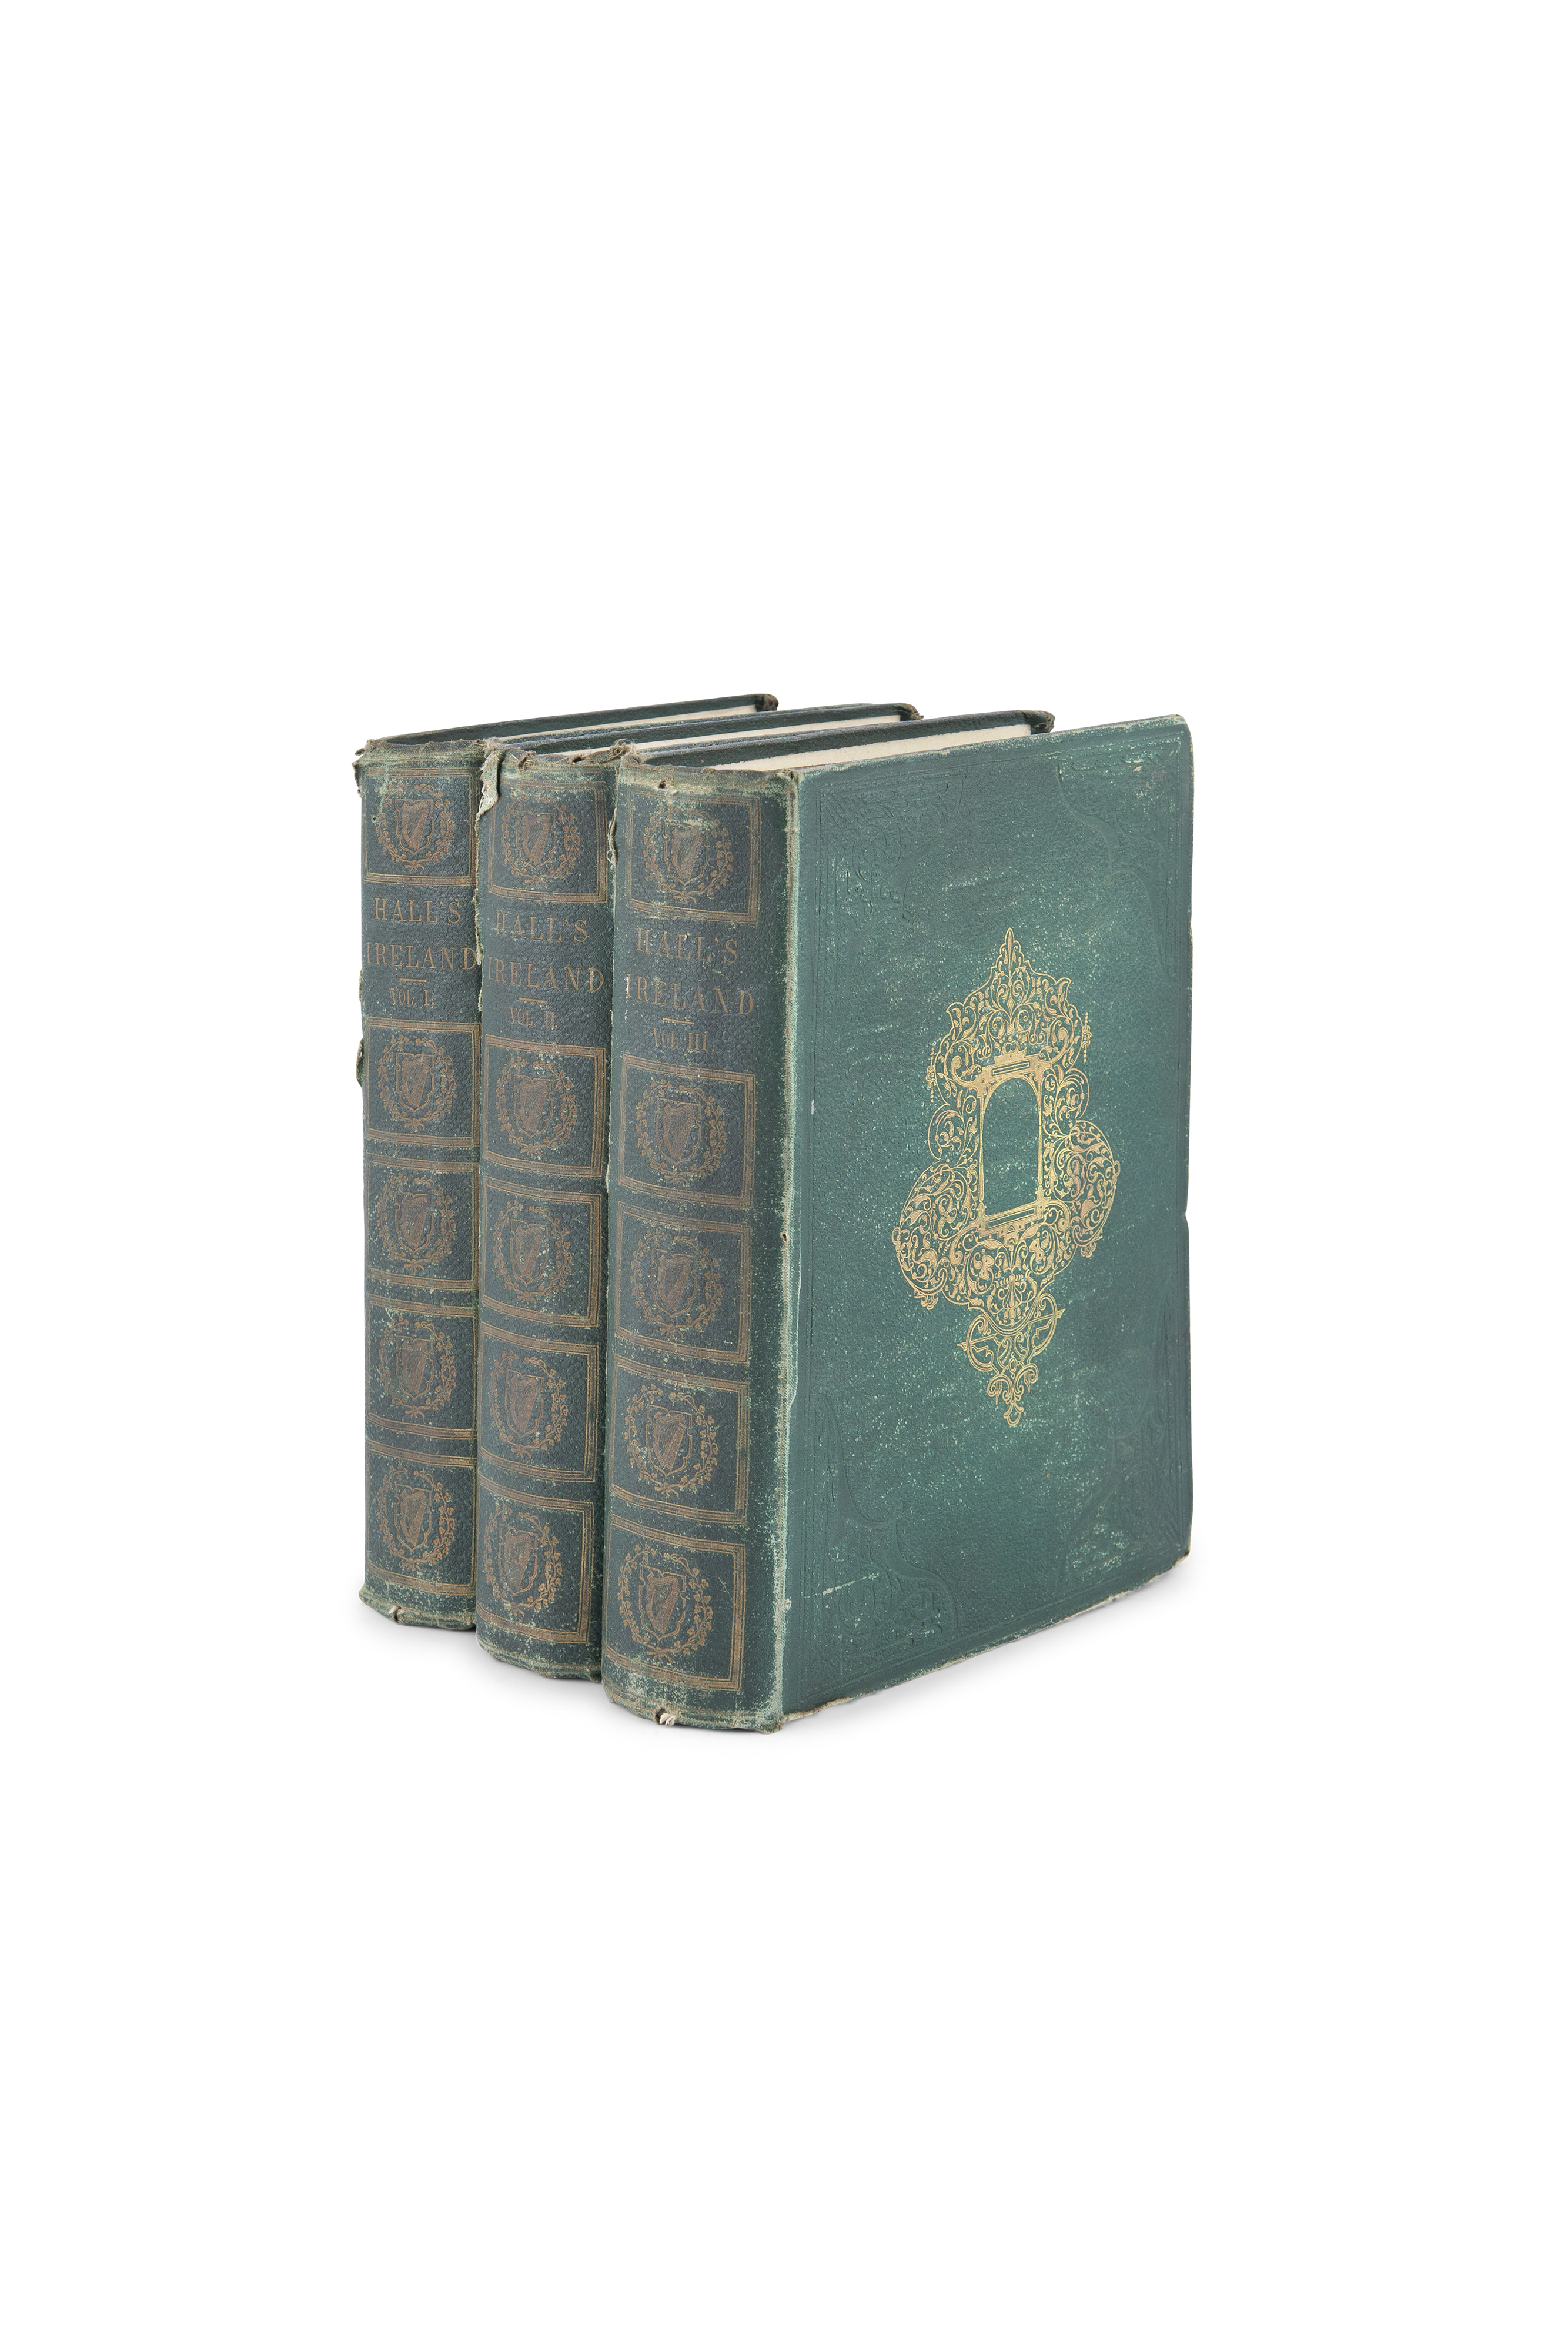 HALLS IRELANDThree volumes, full green morocco, with stamped gilt spines and decorated cover.